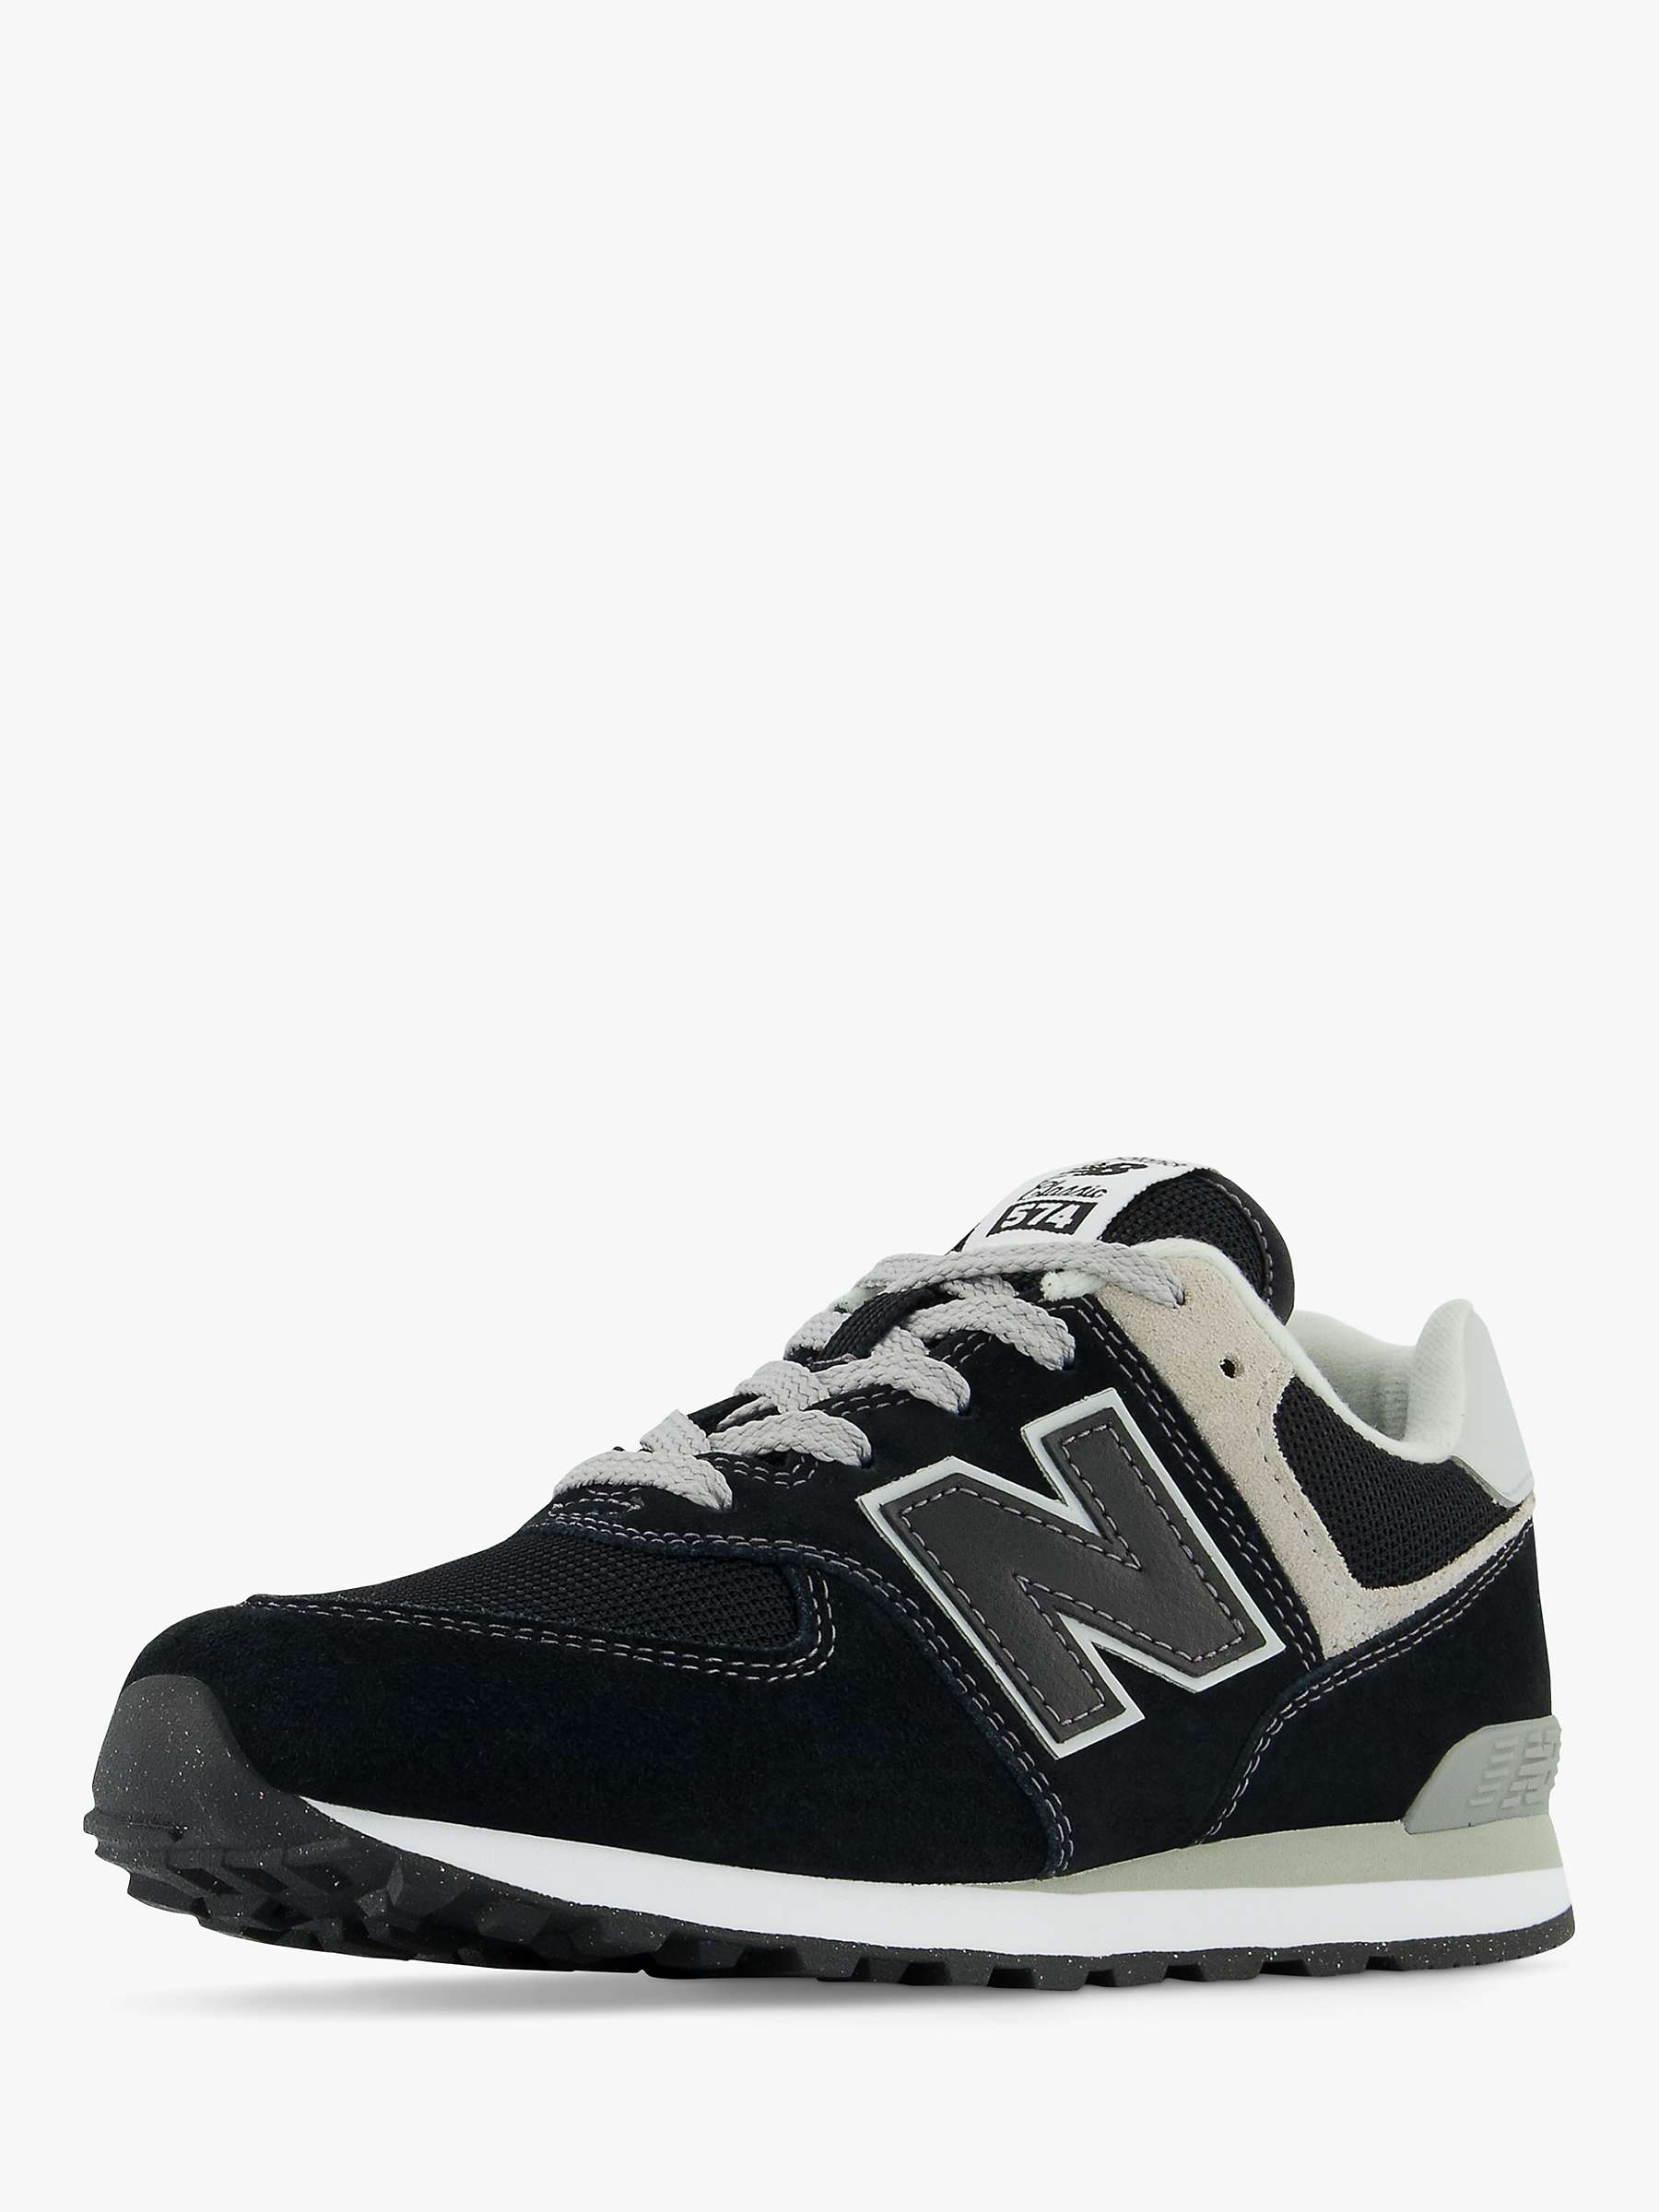 Buy New Balance Kids' 574 Lace Up Trainers, Black Online at johnlewis.com